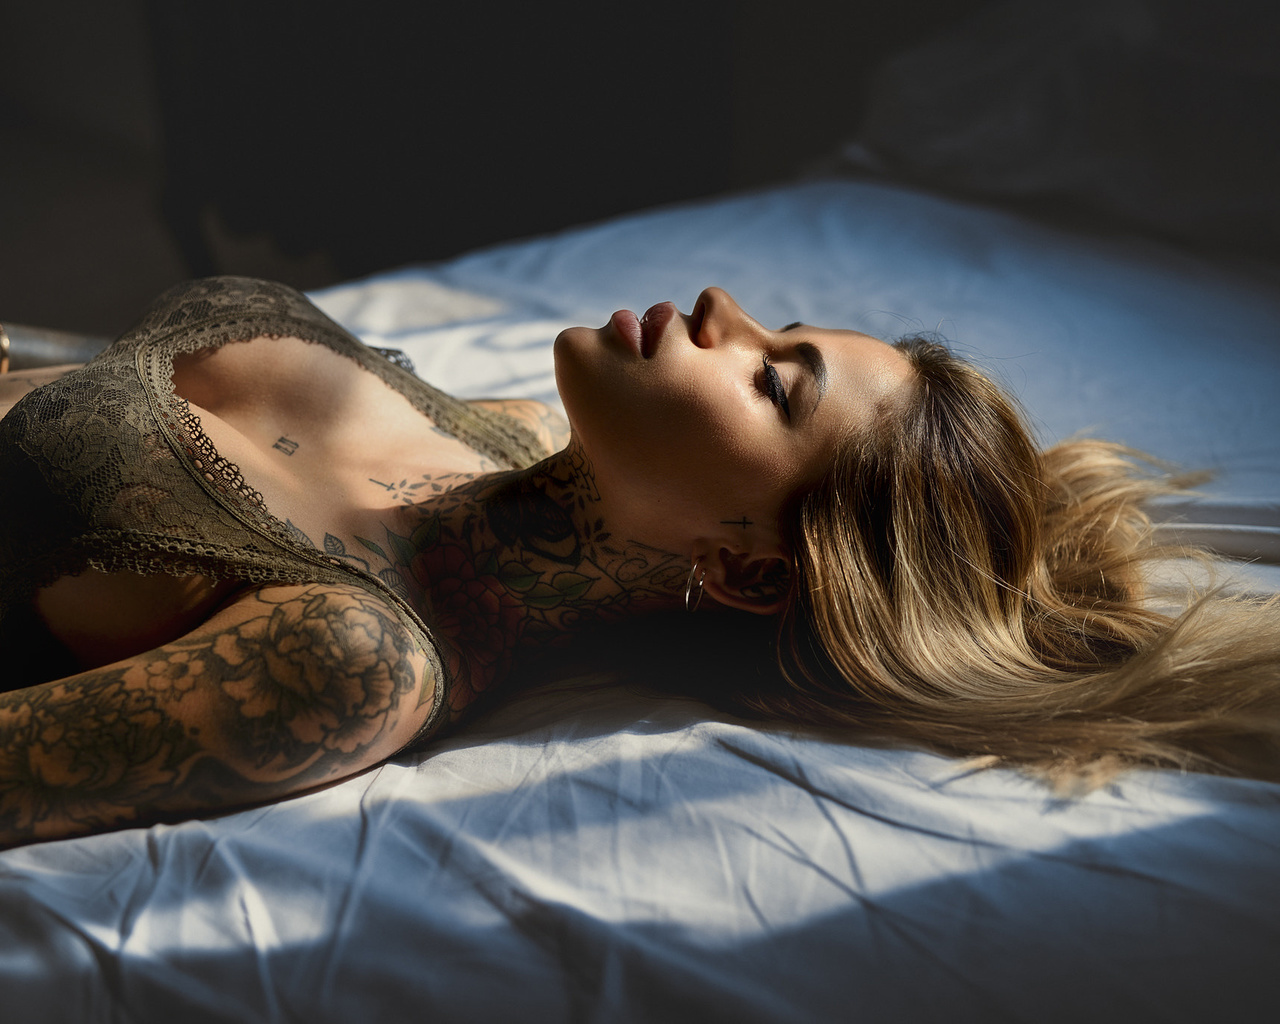 women, bra, giovanni zacche, tanned, tattoo, closed eyes, blonde, lying on back, in bed, eyeliner, portrait